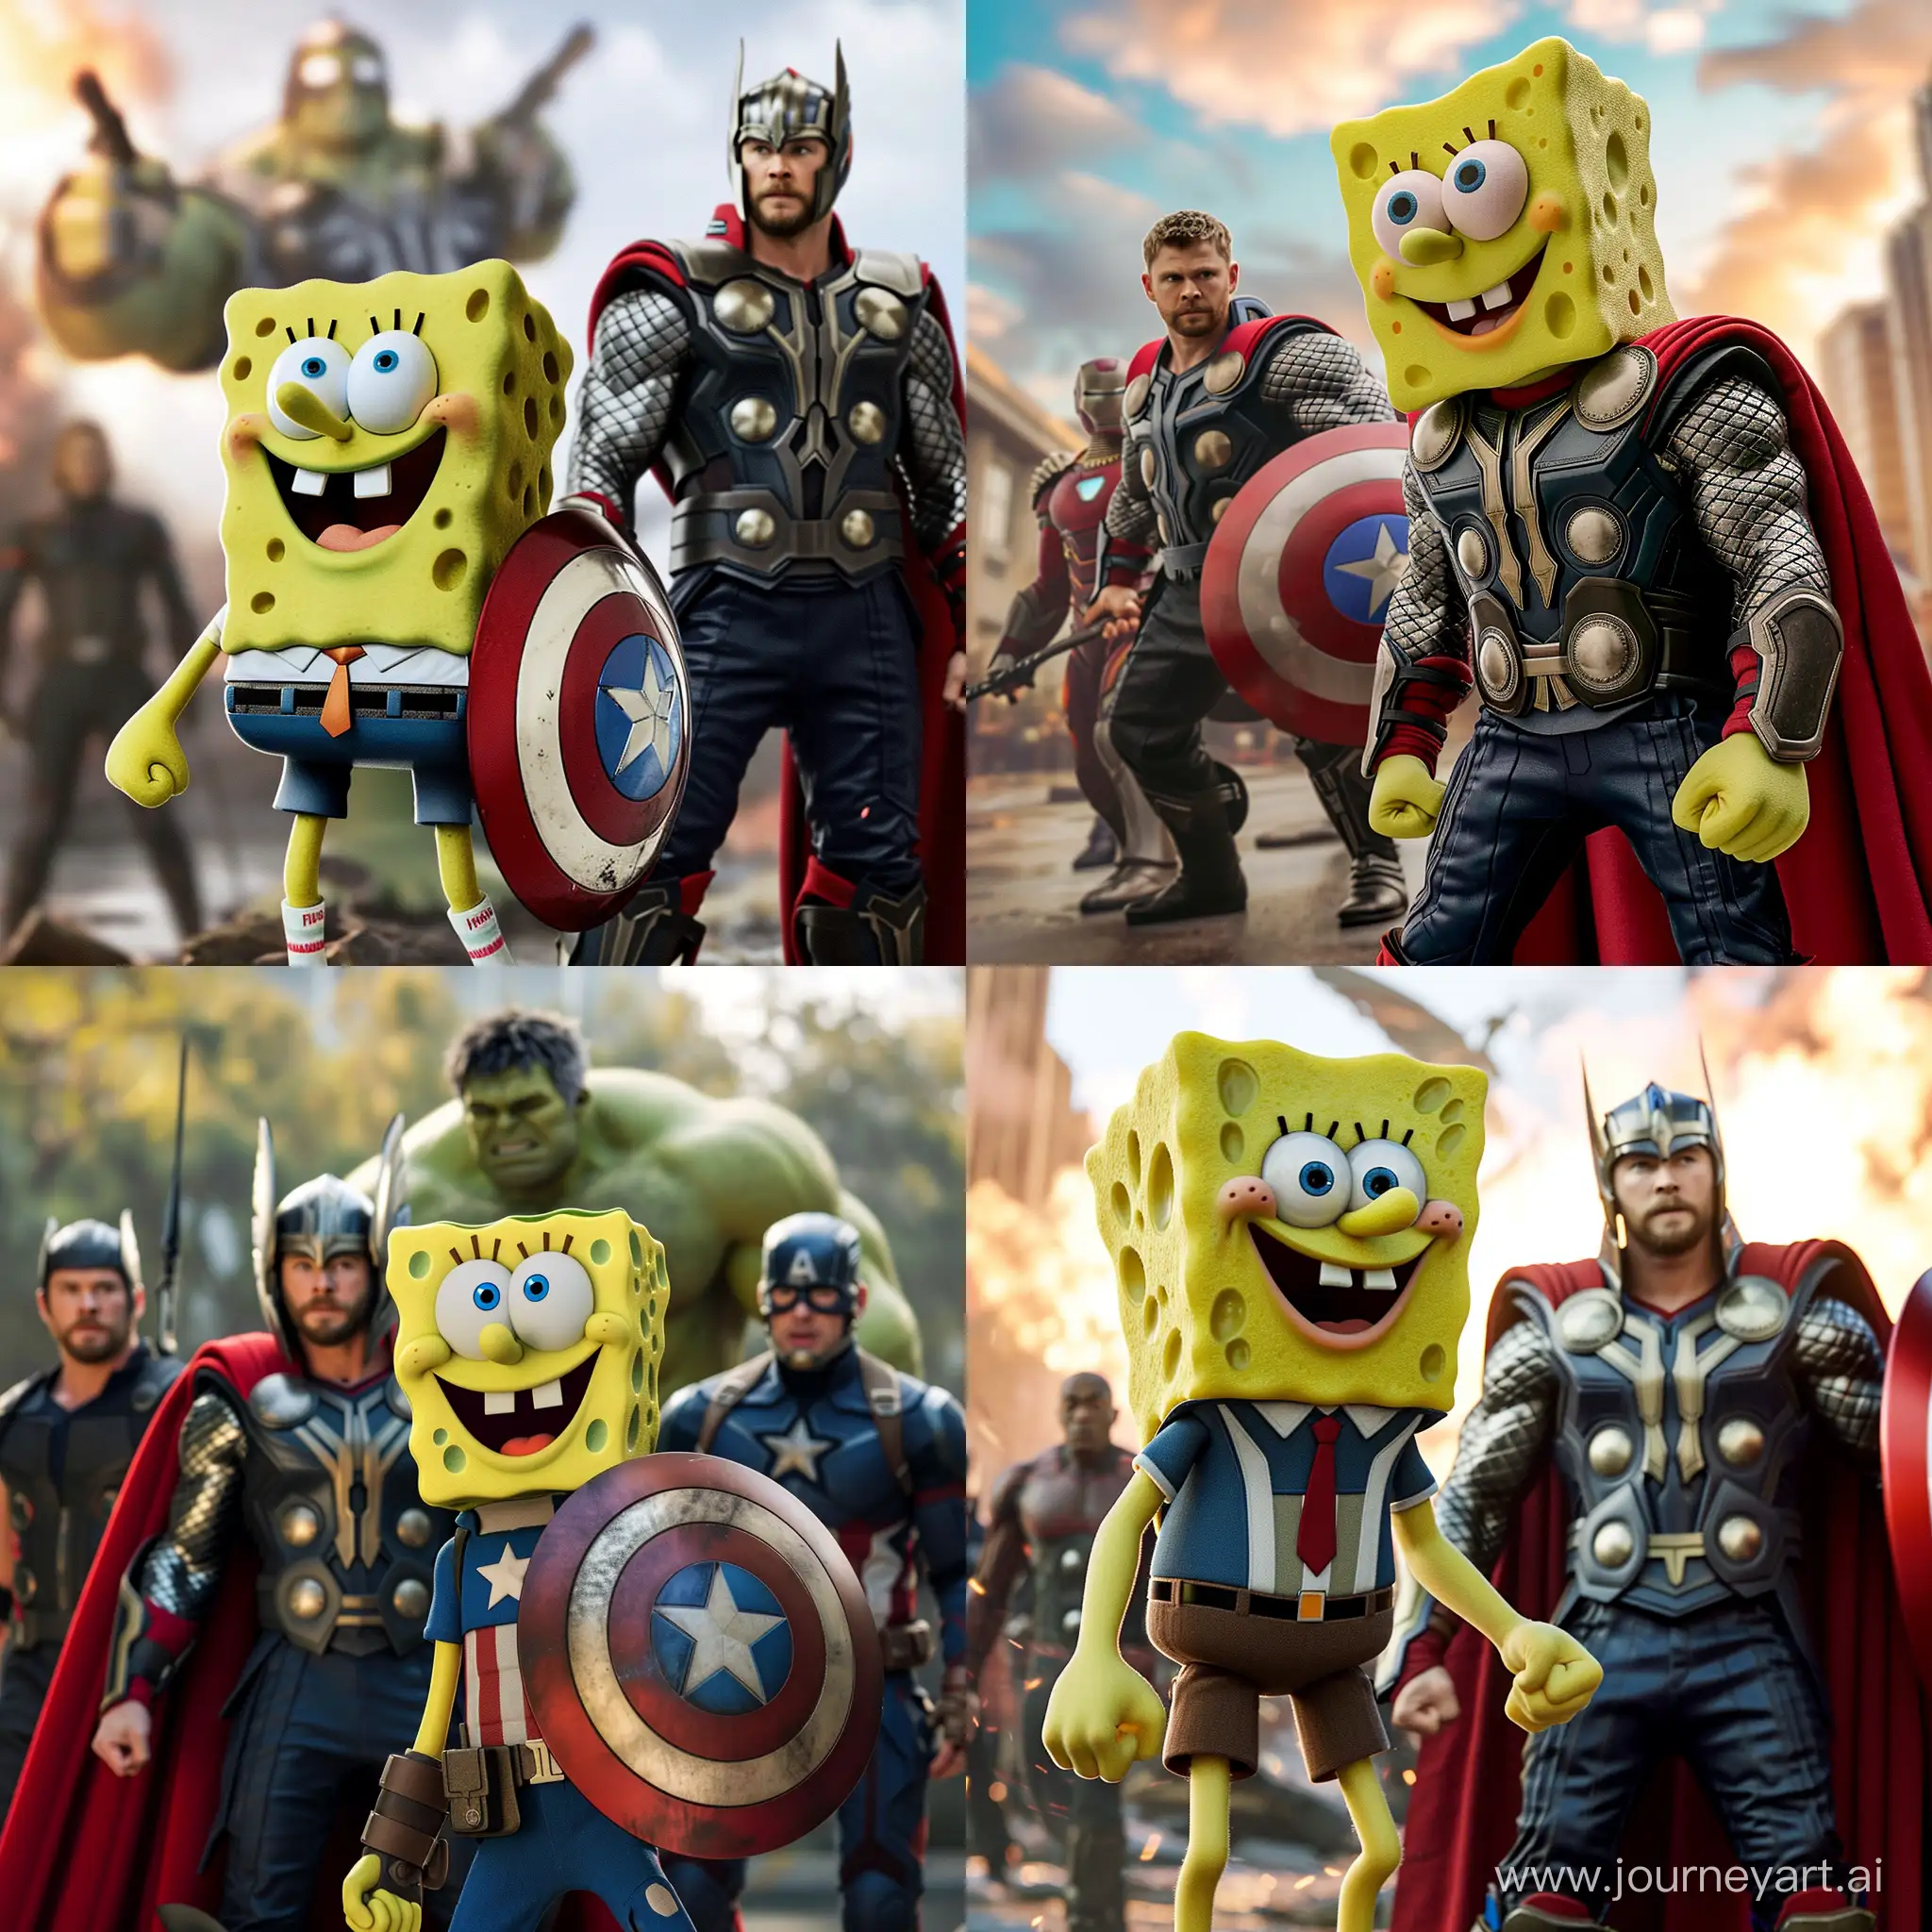 SpongeBob-Joins-the-Avengers-in-a-11-Aspect-Ratio-Image-7436